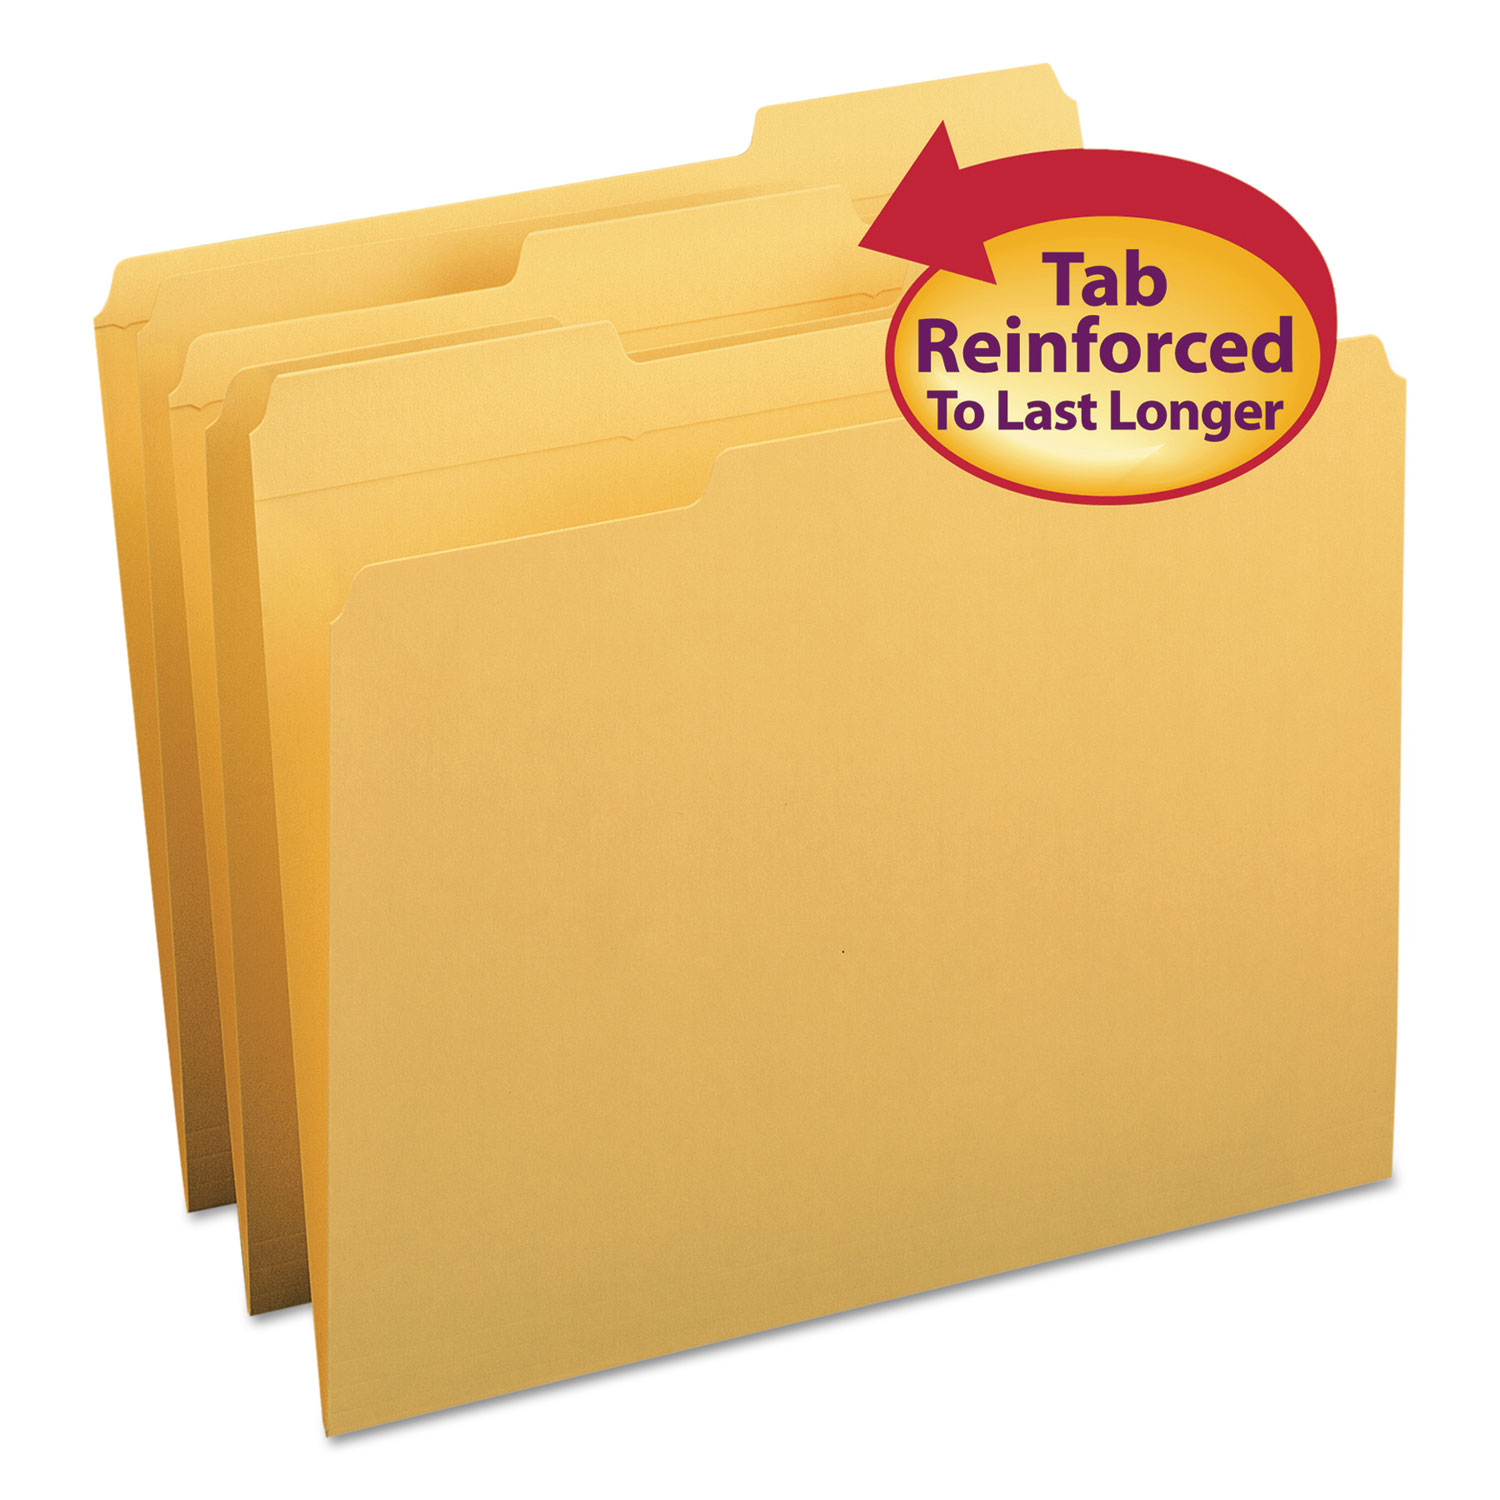  Smead 12234 Reinforced Top Tab Colored File Folders, 1/3-Cut Tabs, Letter Size, Goldenrod, 100/Box (SMD12234) 